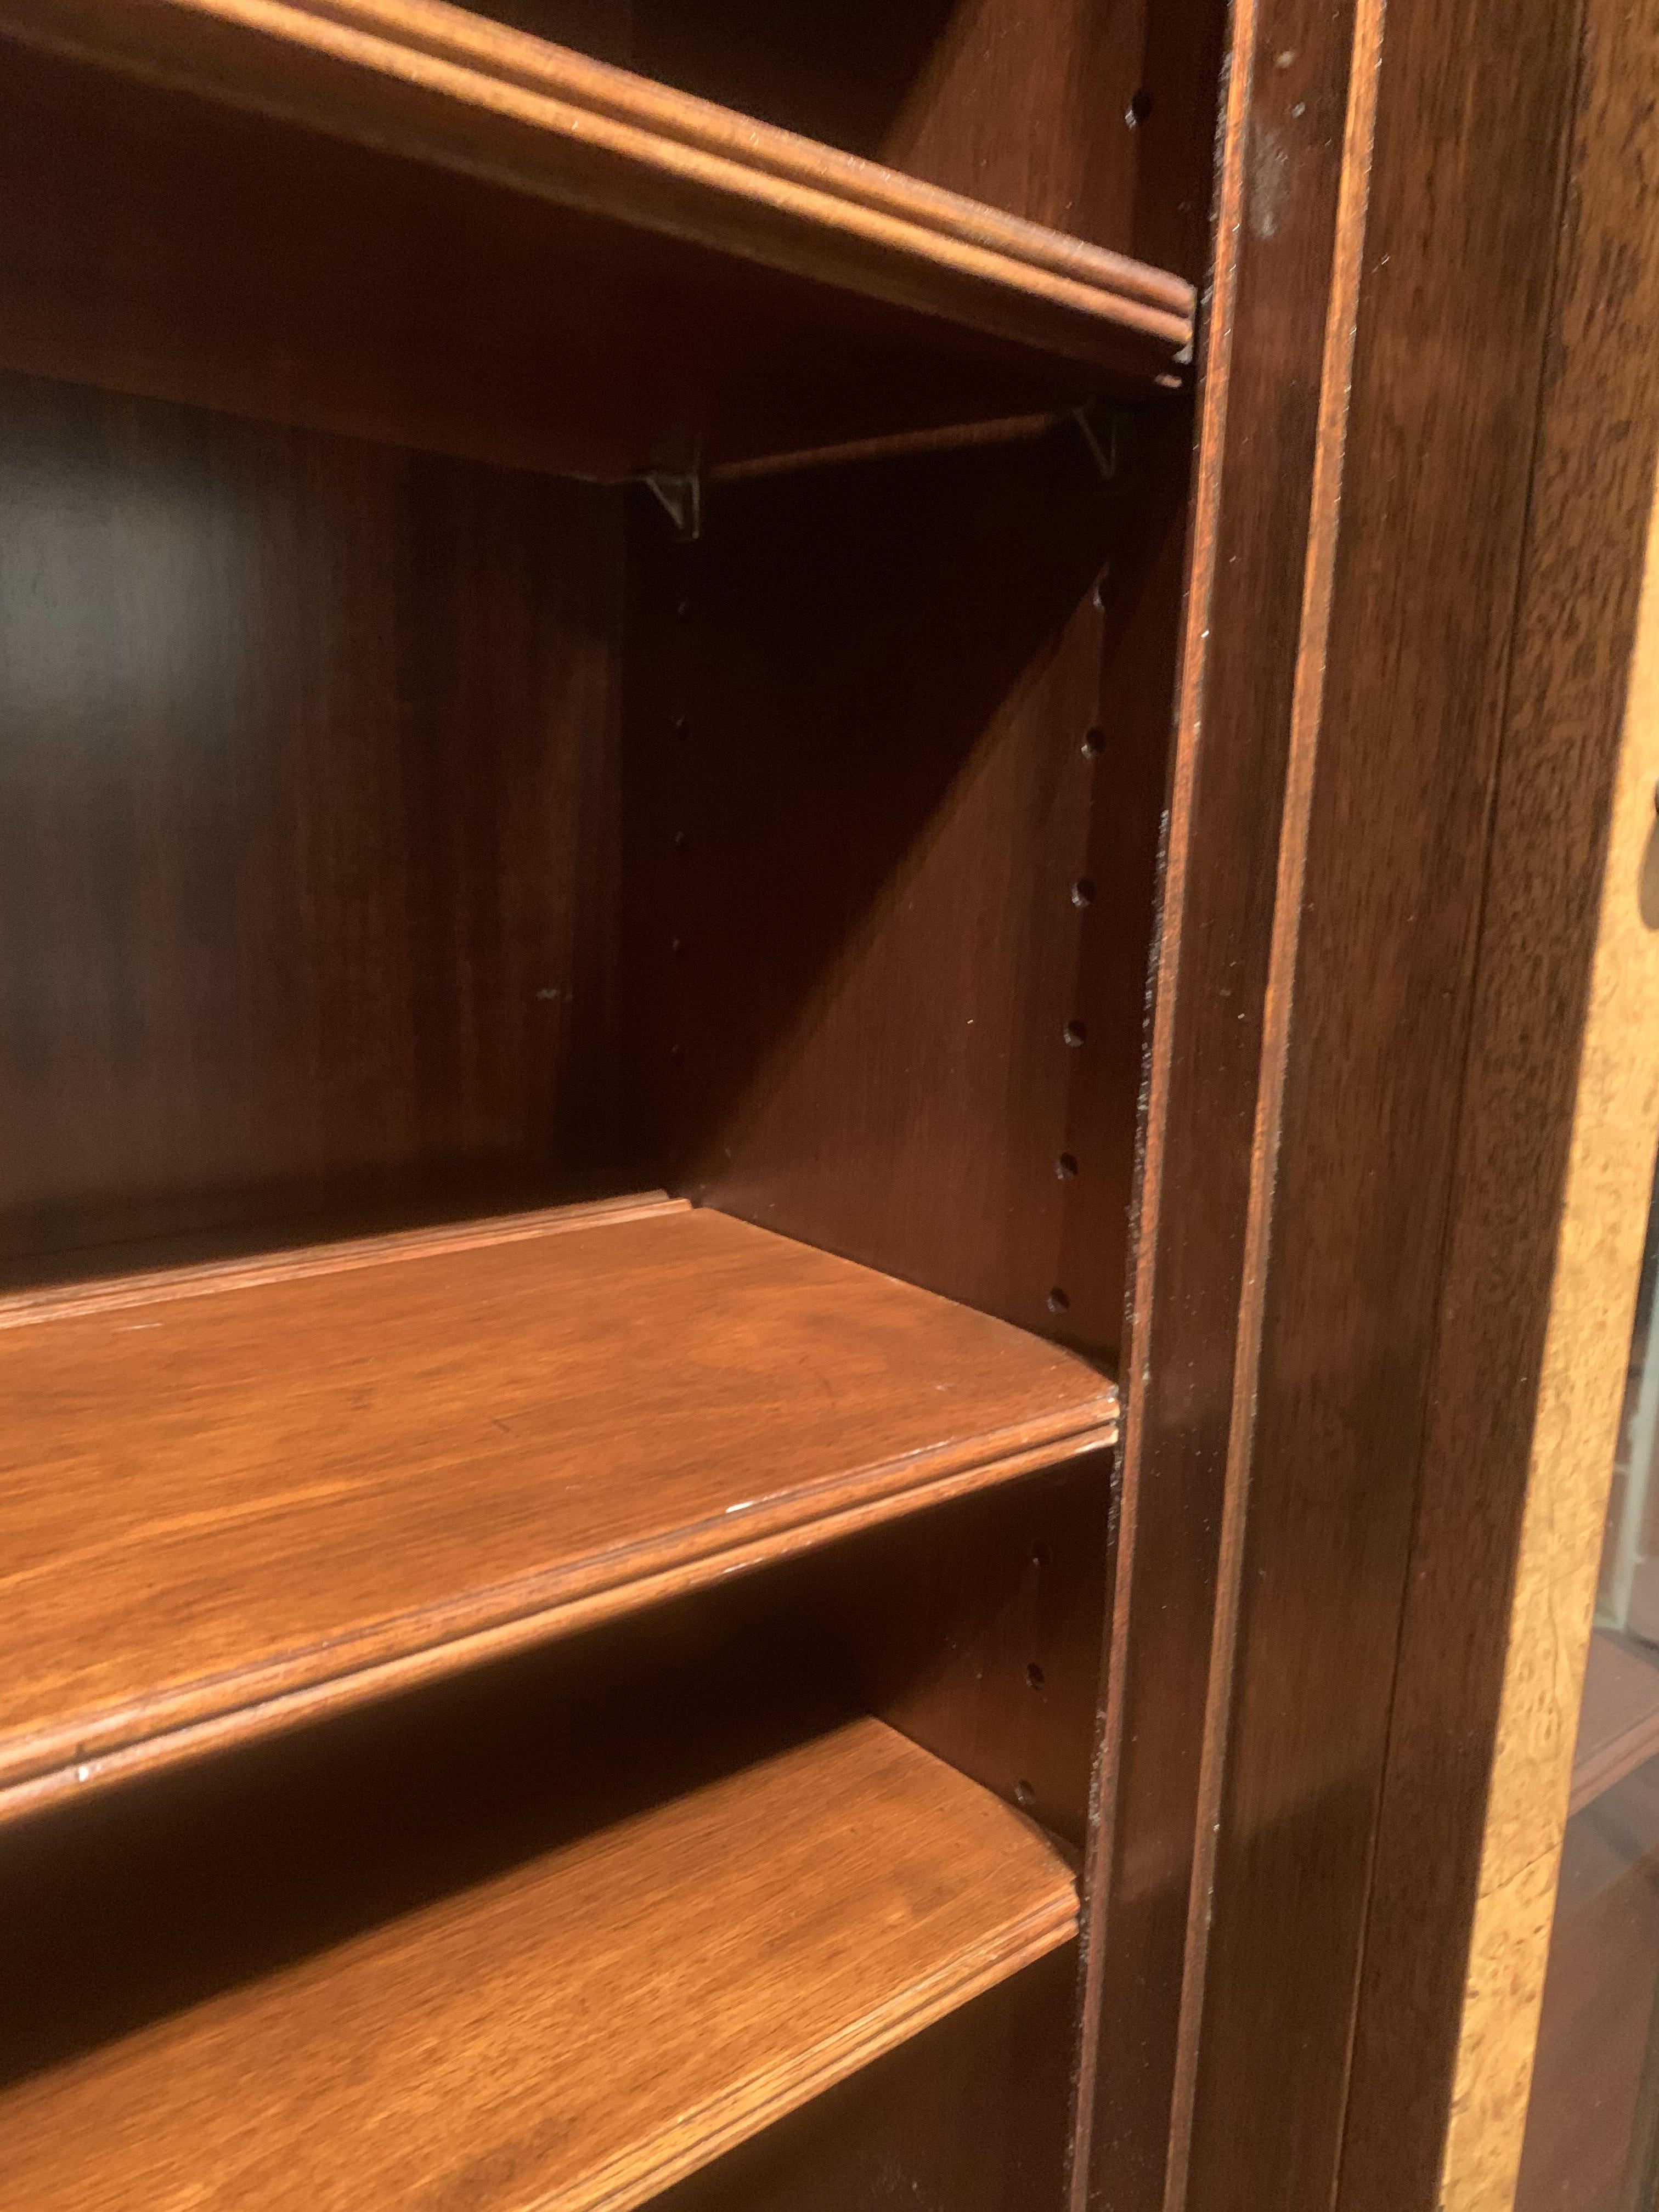 Diminutive Adam Style Breakfront Bookcase or China Cabinet by F&G Furniture Co 1